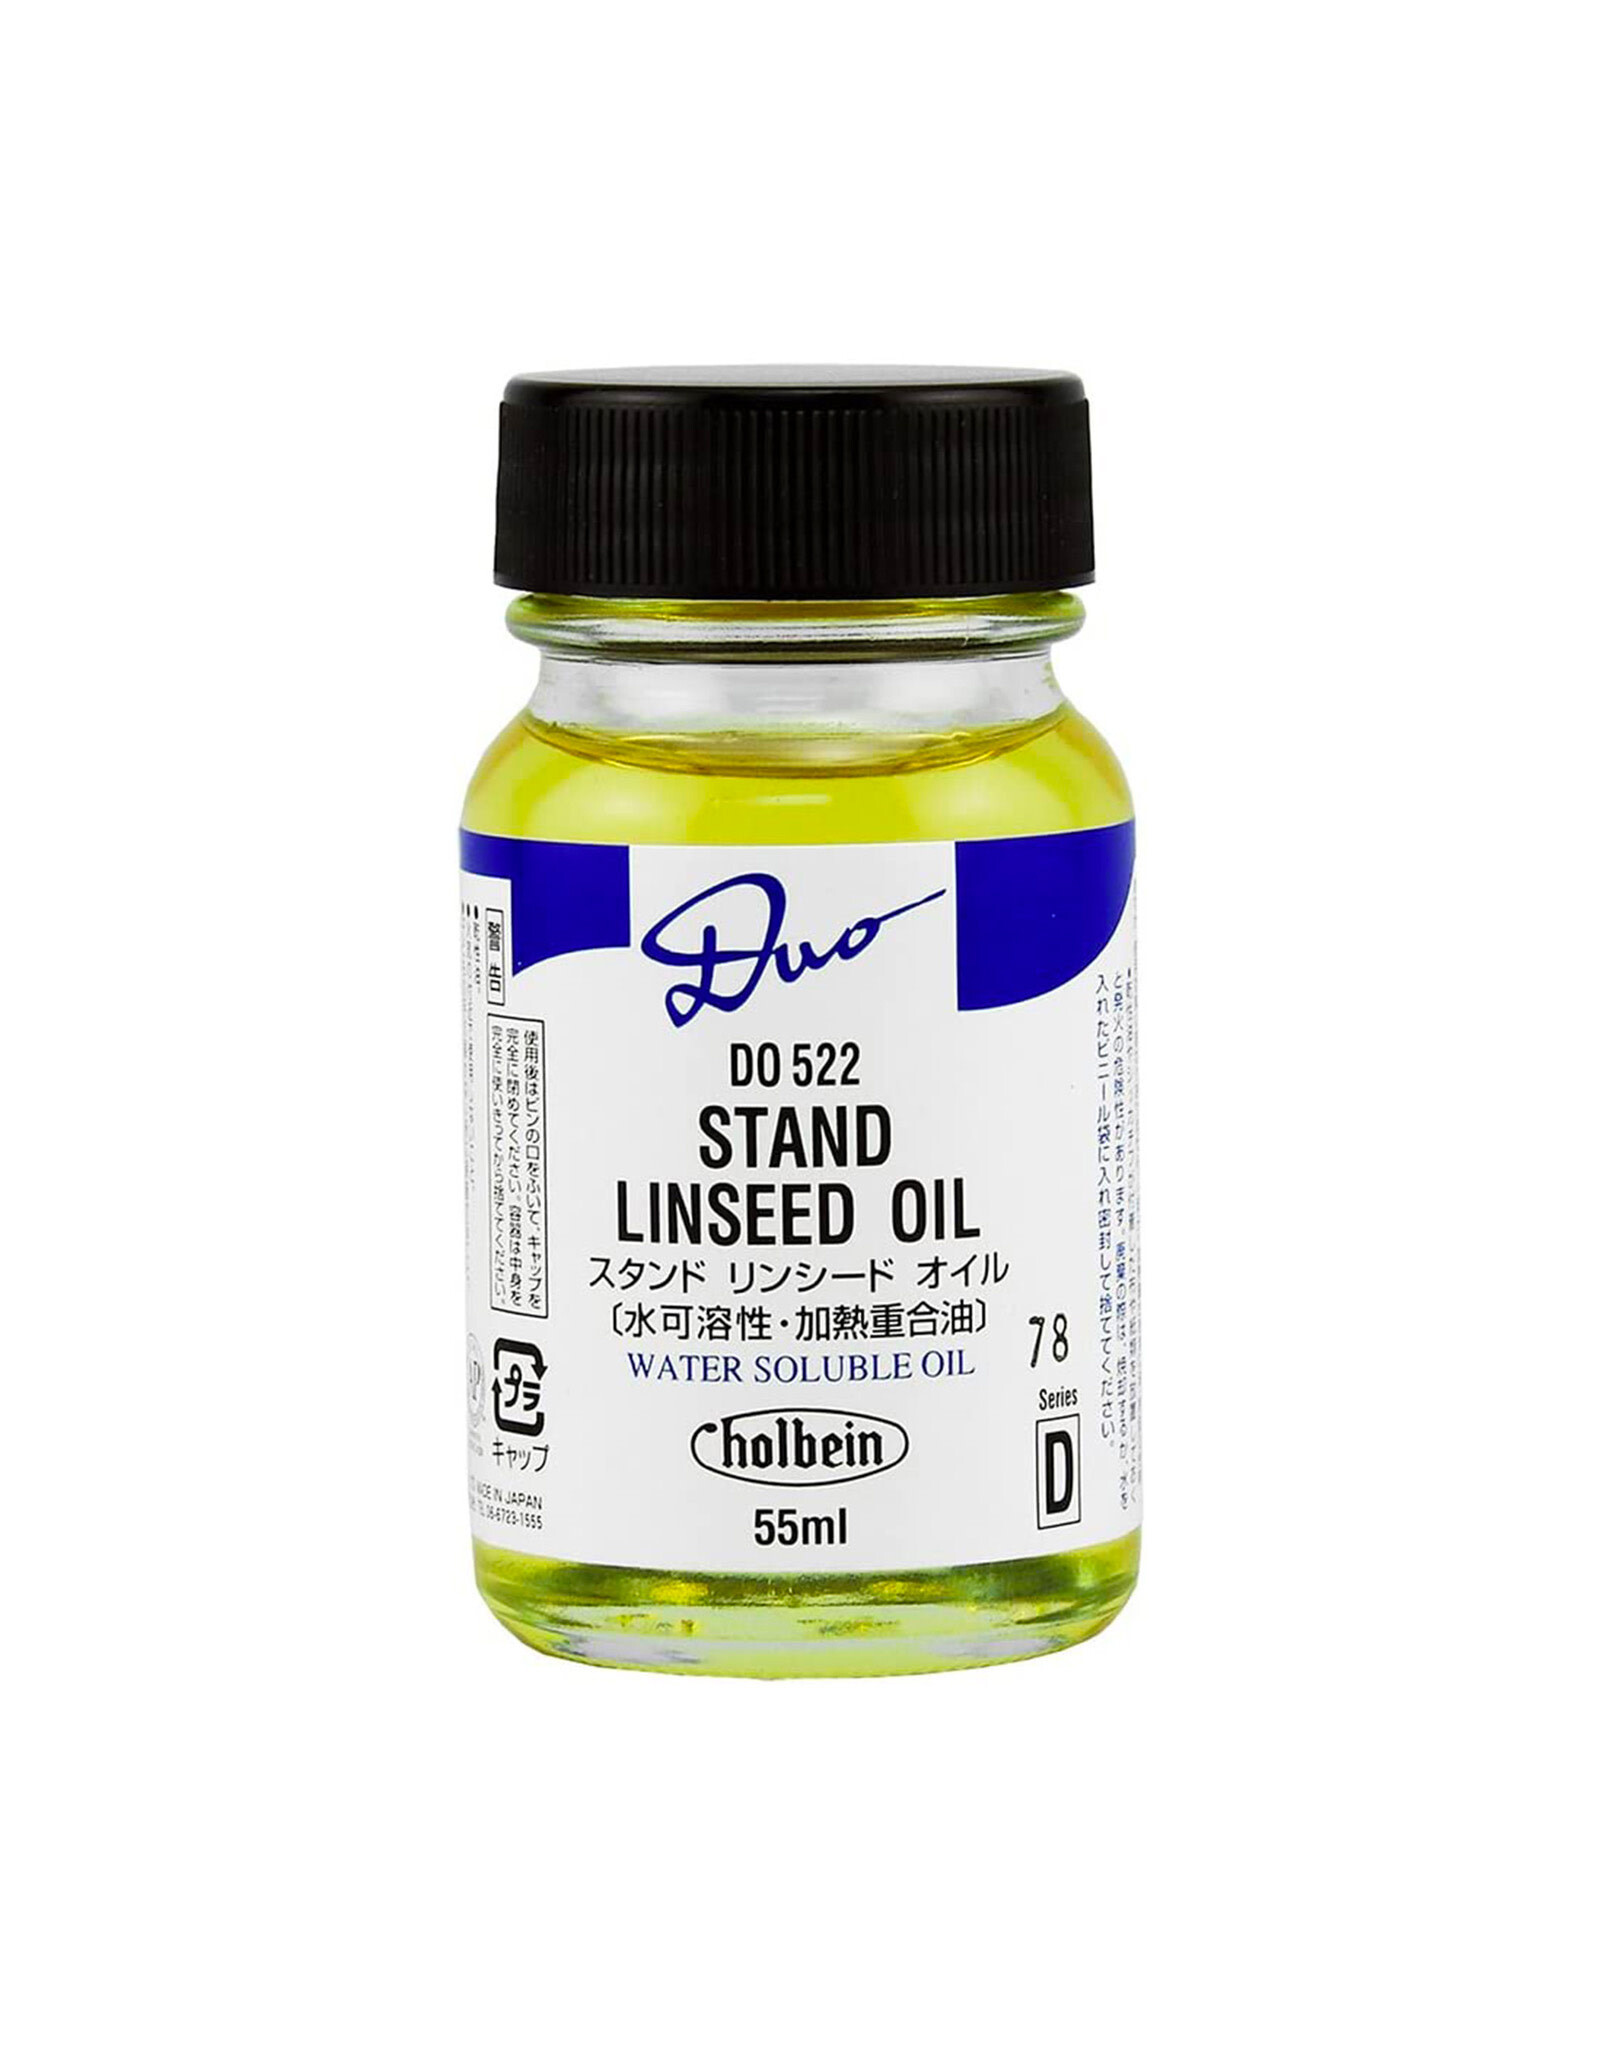 HOLBEIN Holbein Duo Oil Medium, Stand Linseed Oil, 55ml